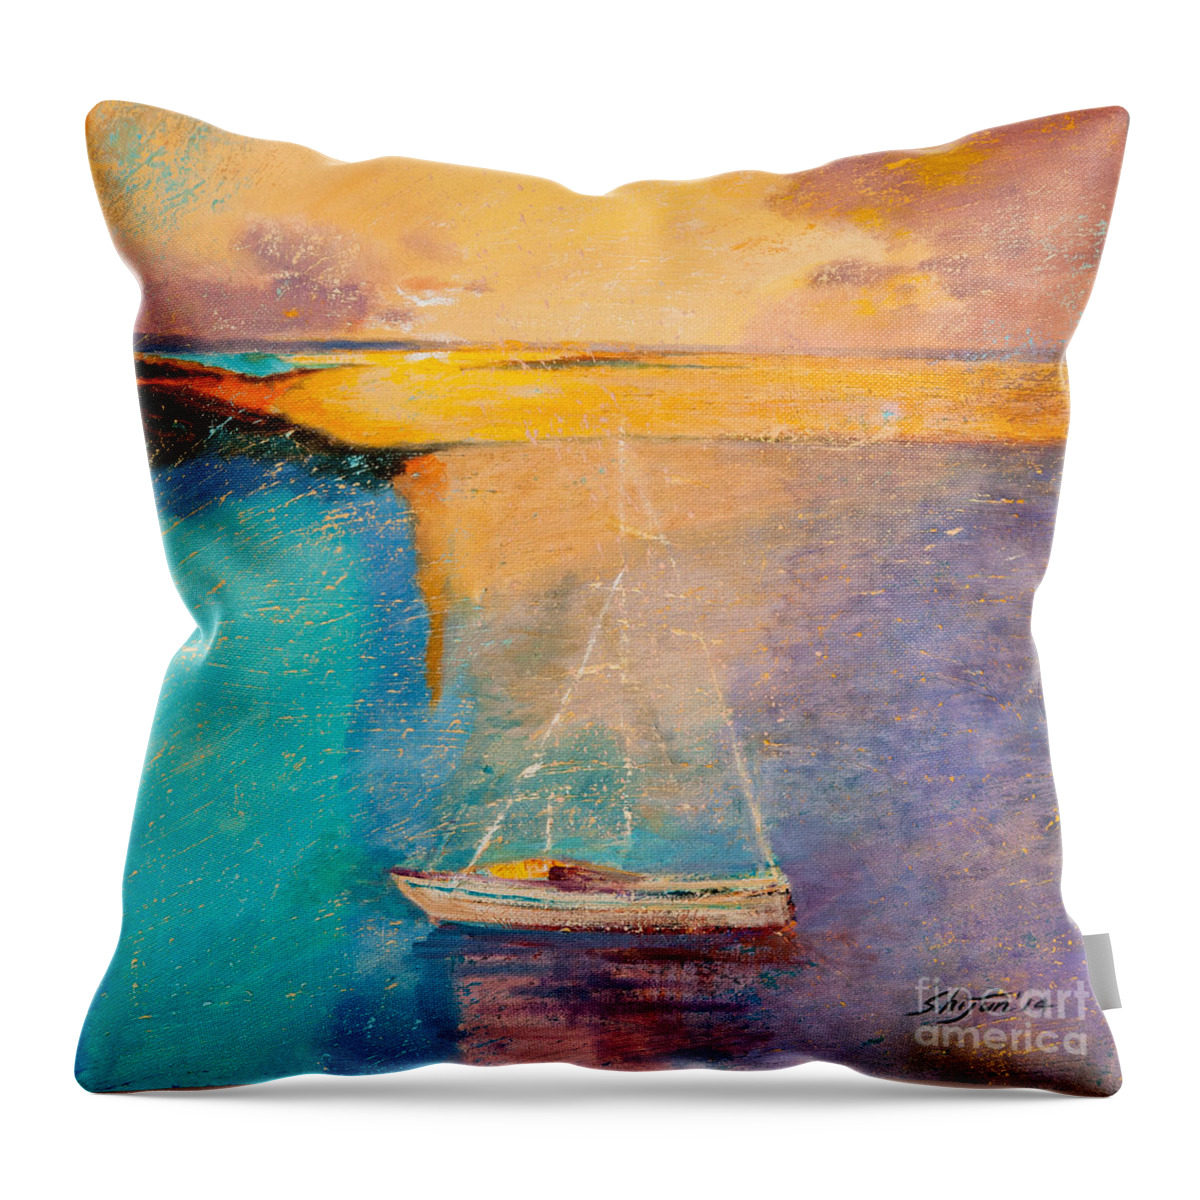 Seascape Throw Pillow featuring the painting Amazing Ocean II by Shijun Munns